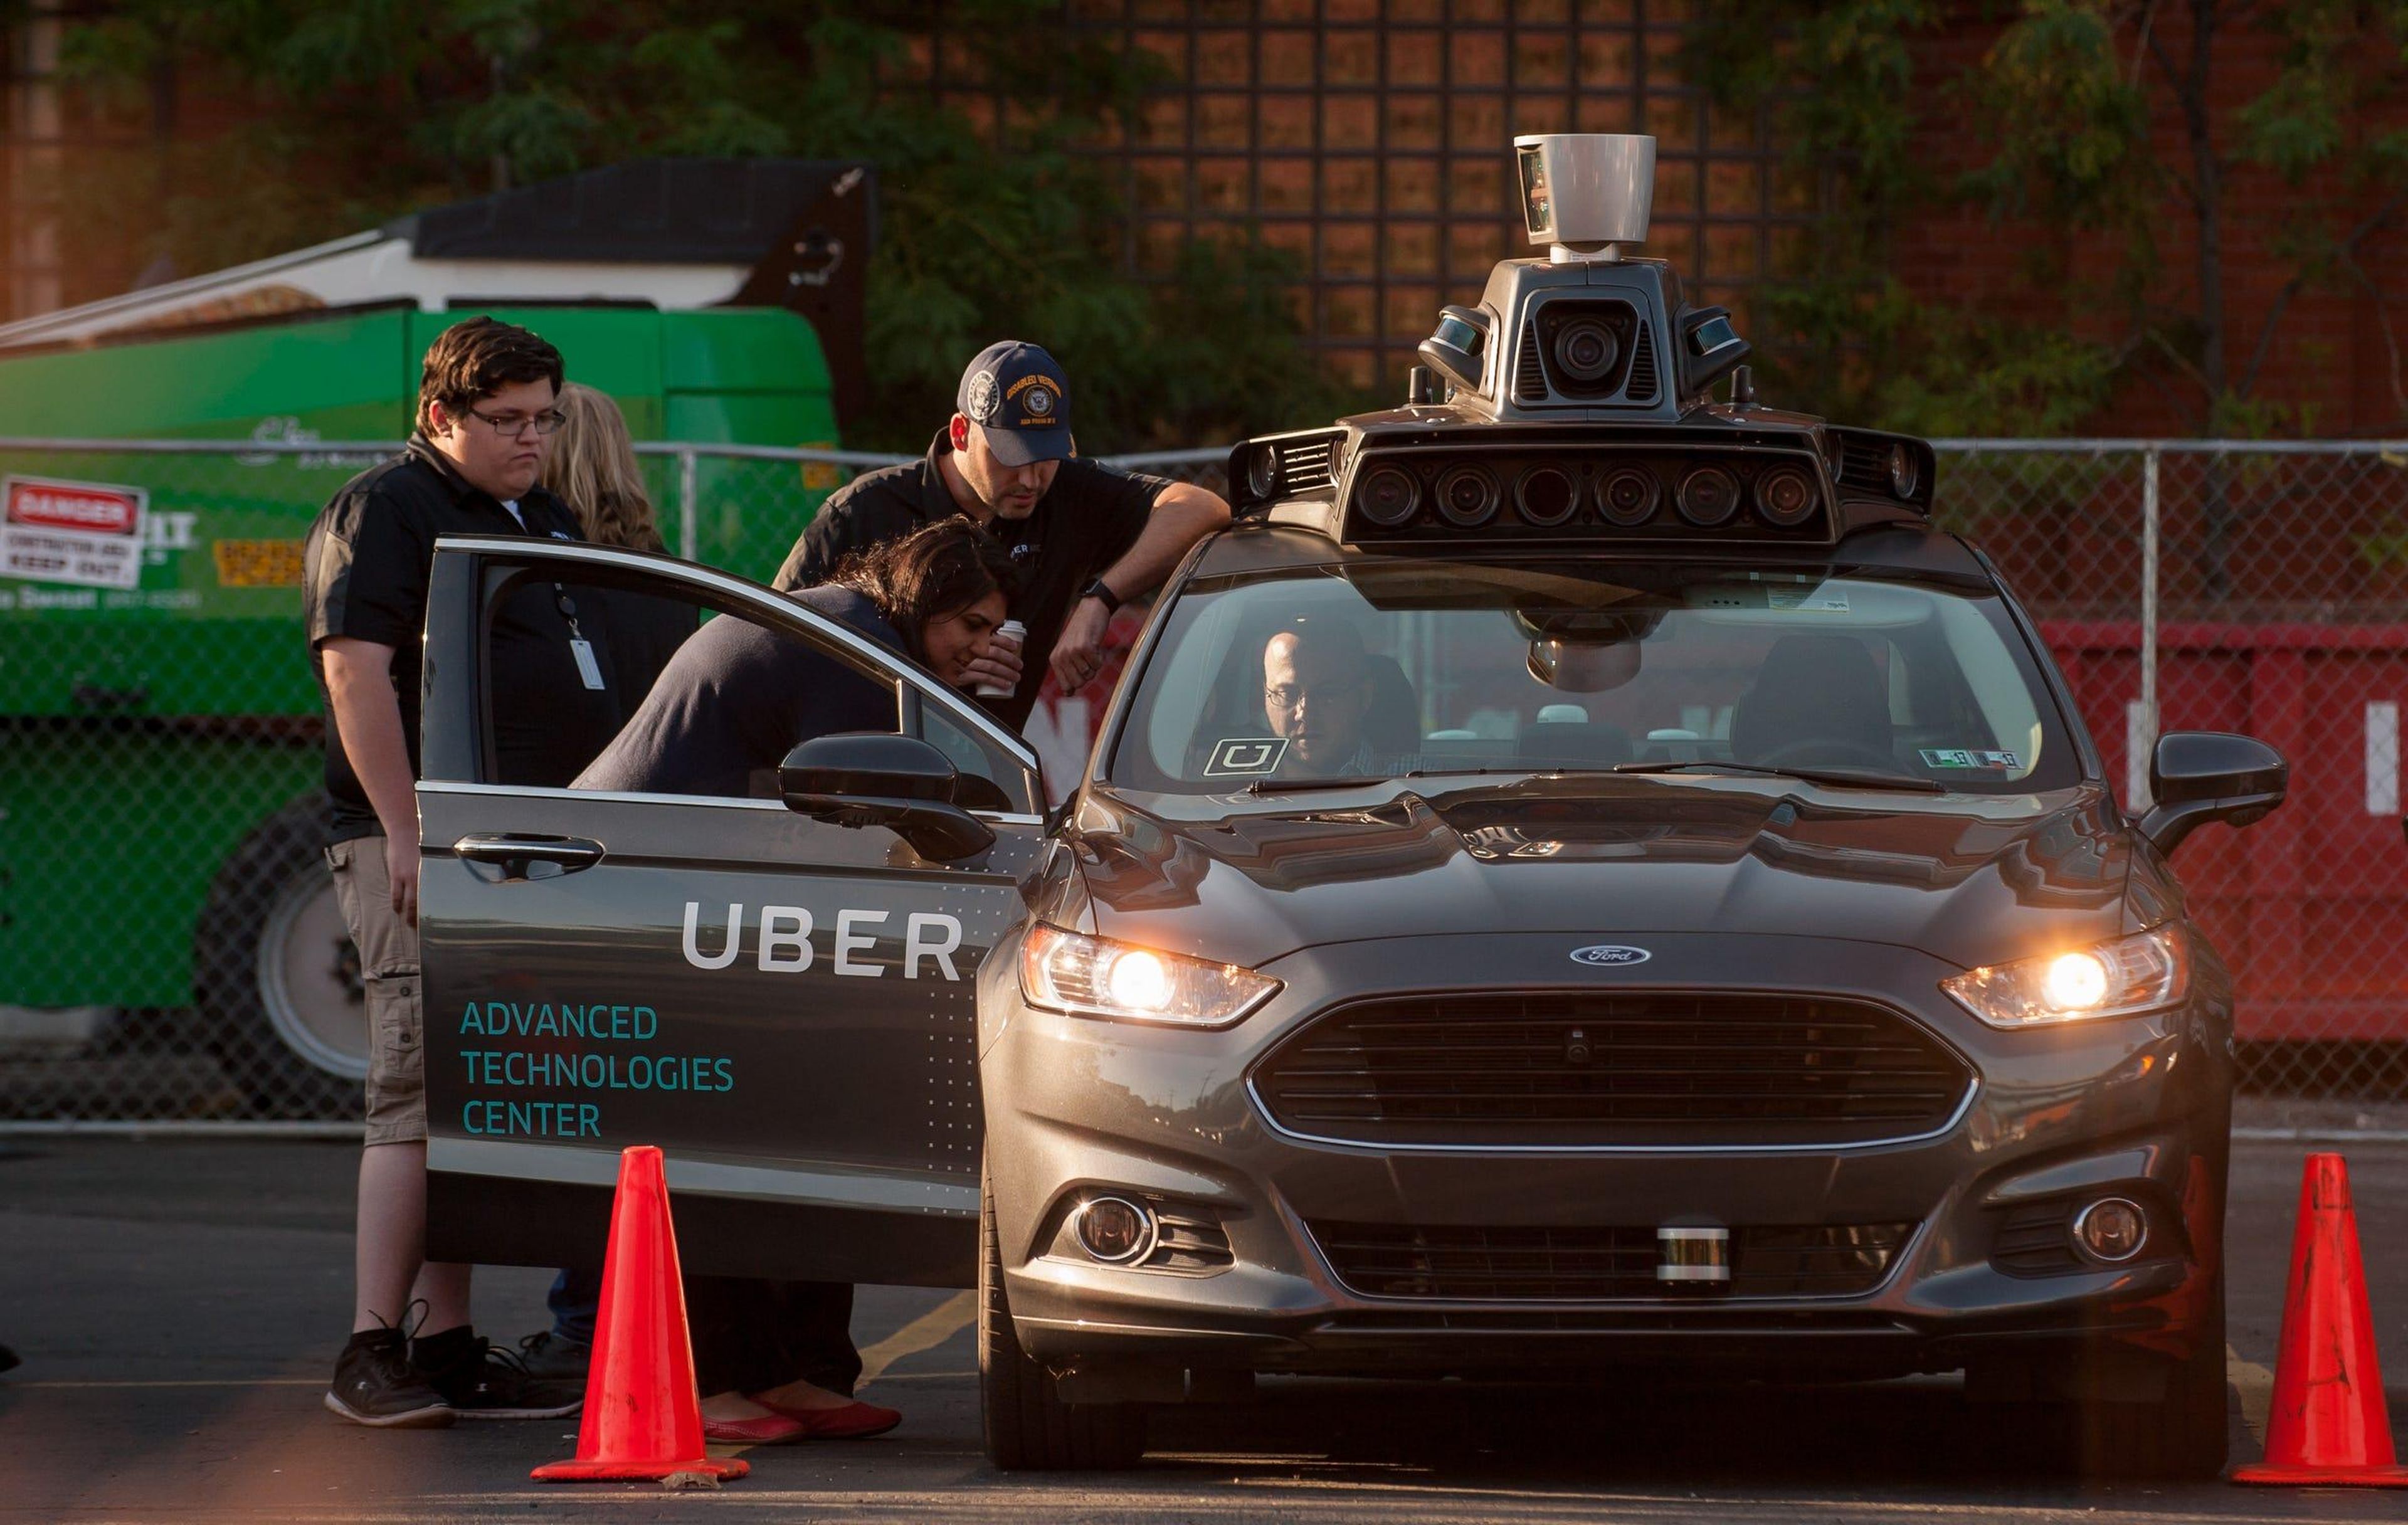 Uber launched its own self-driving team in 2015.